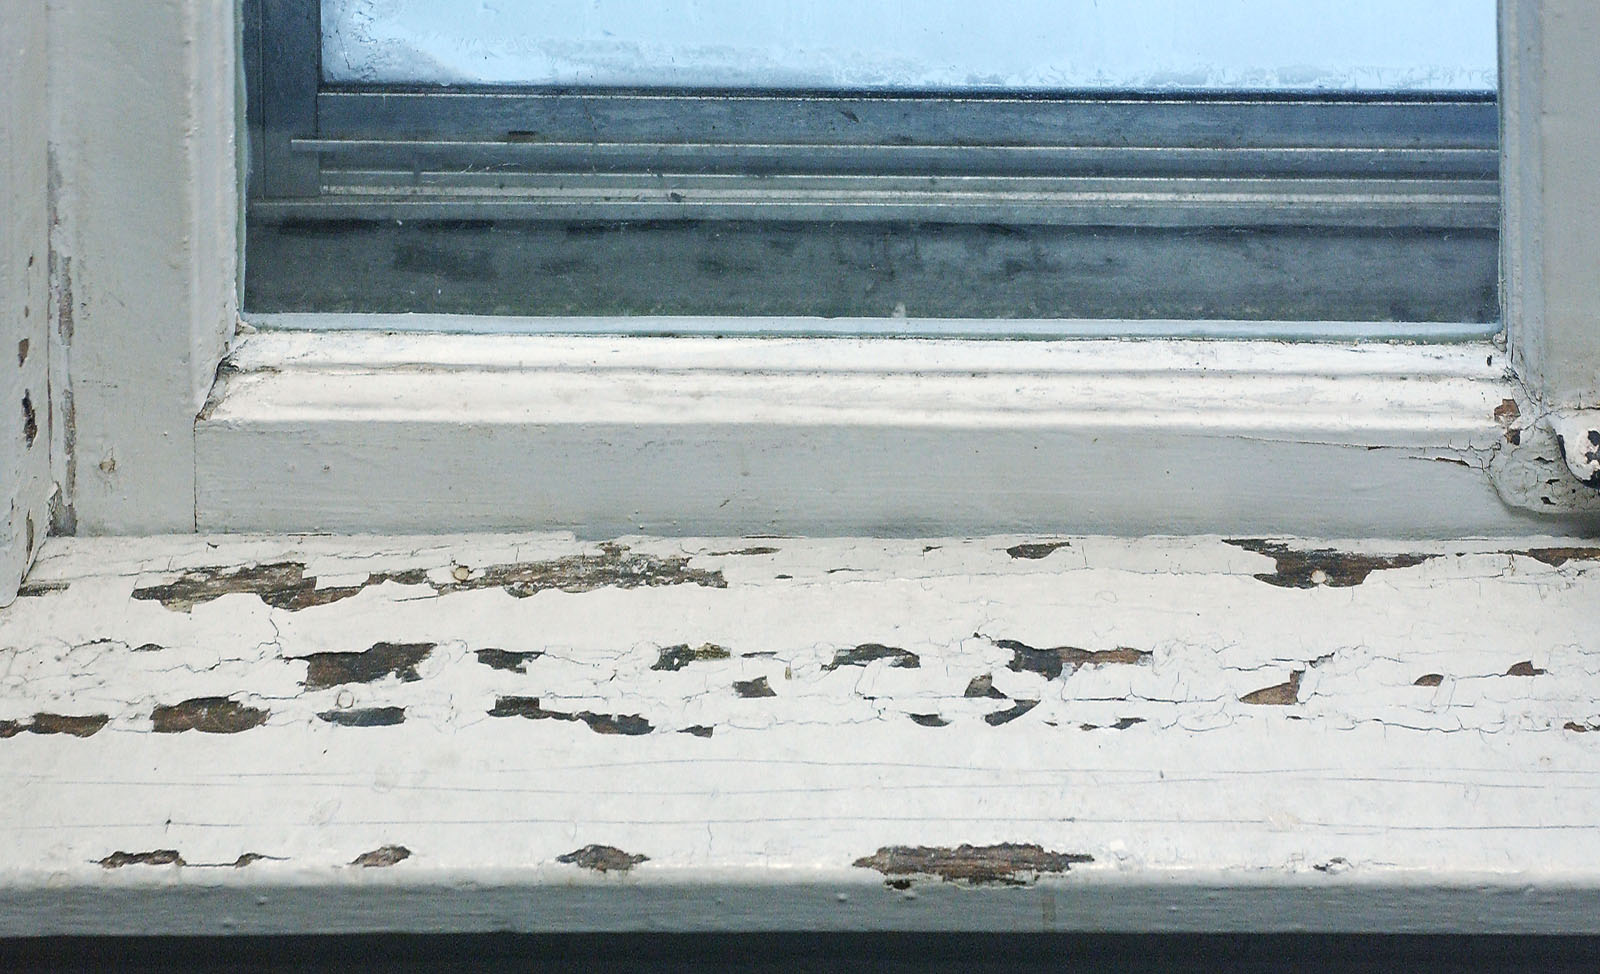 chipped lead paint in a window